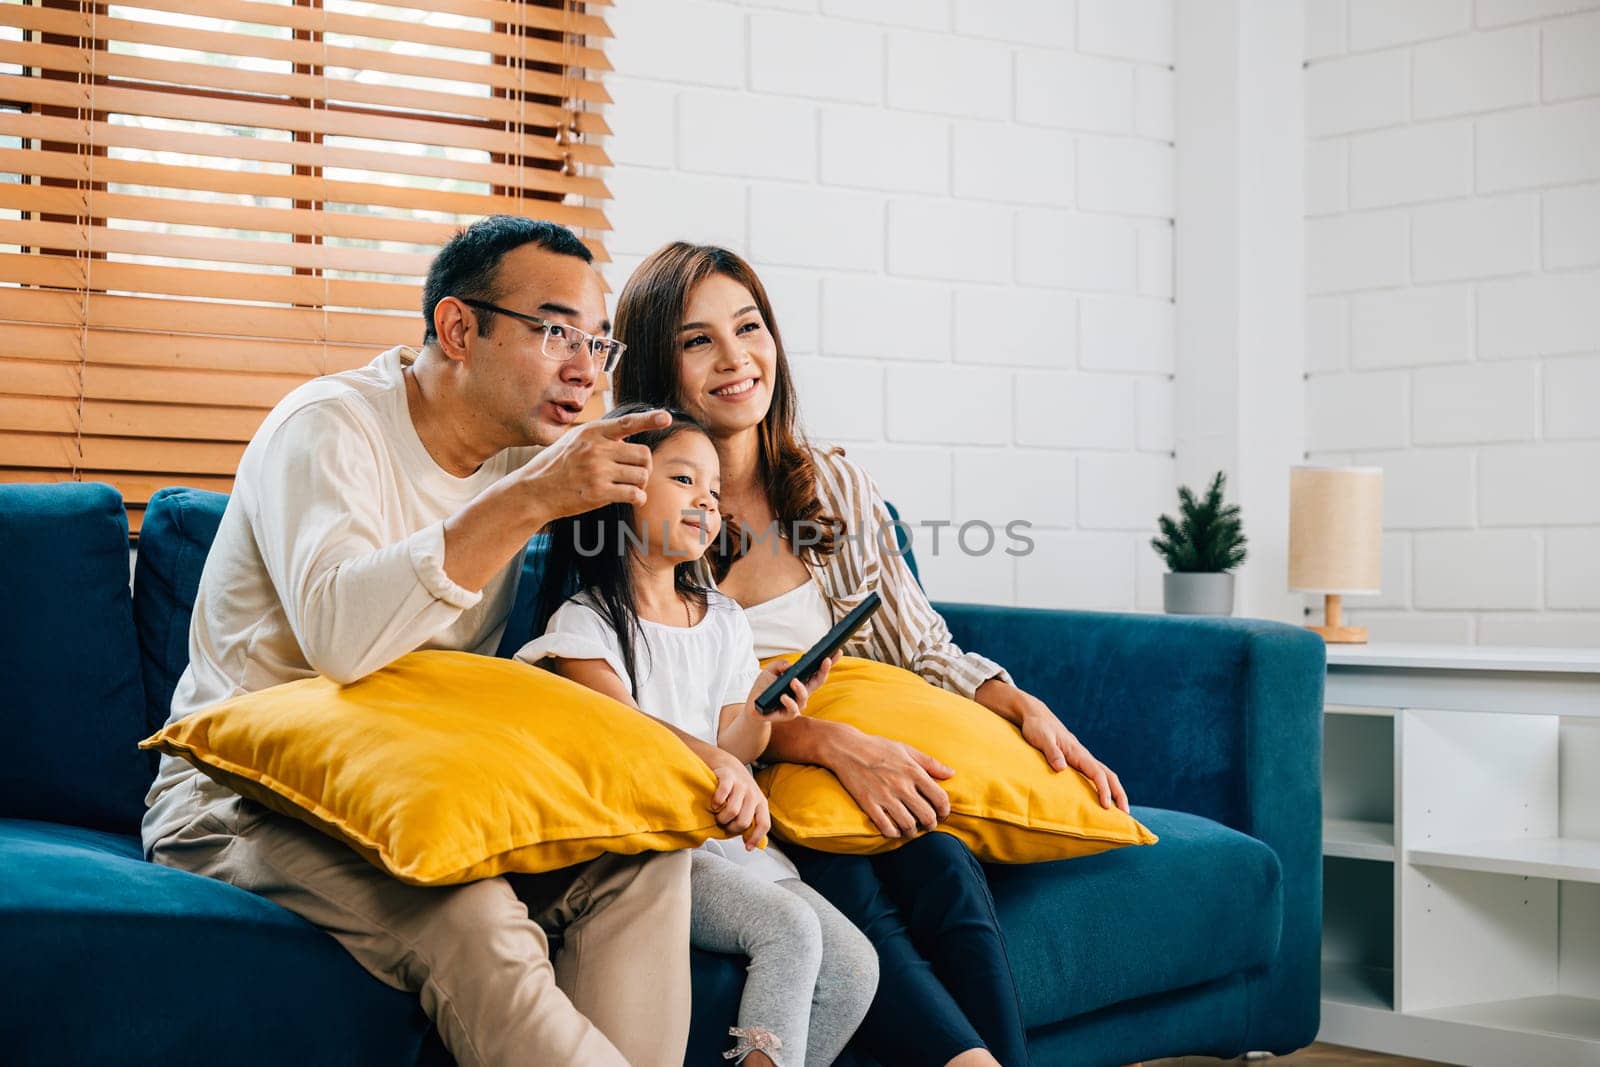 A cheerful Asian family finds relaxation and togetherness watching TV at home. The father mother son and daughter share precious moments of laughter and fun during their weekend time.